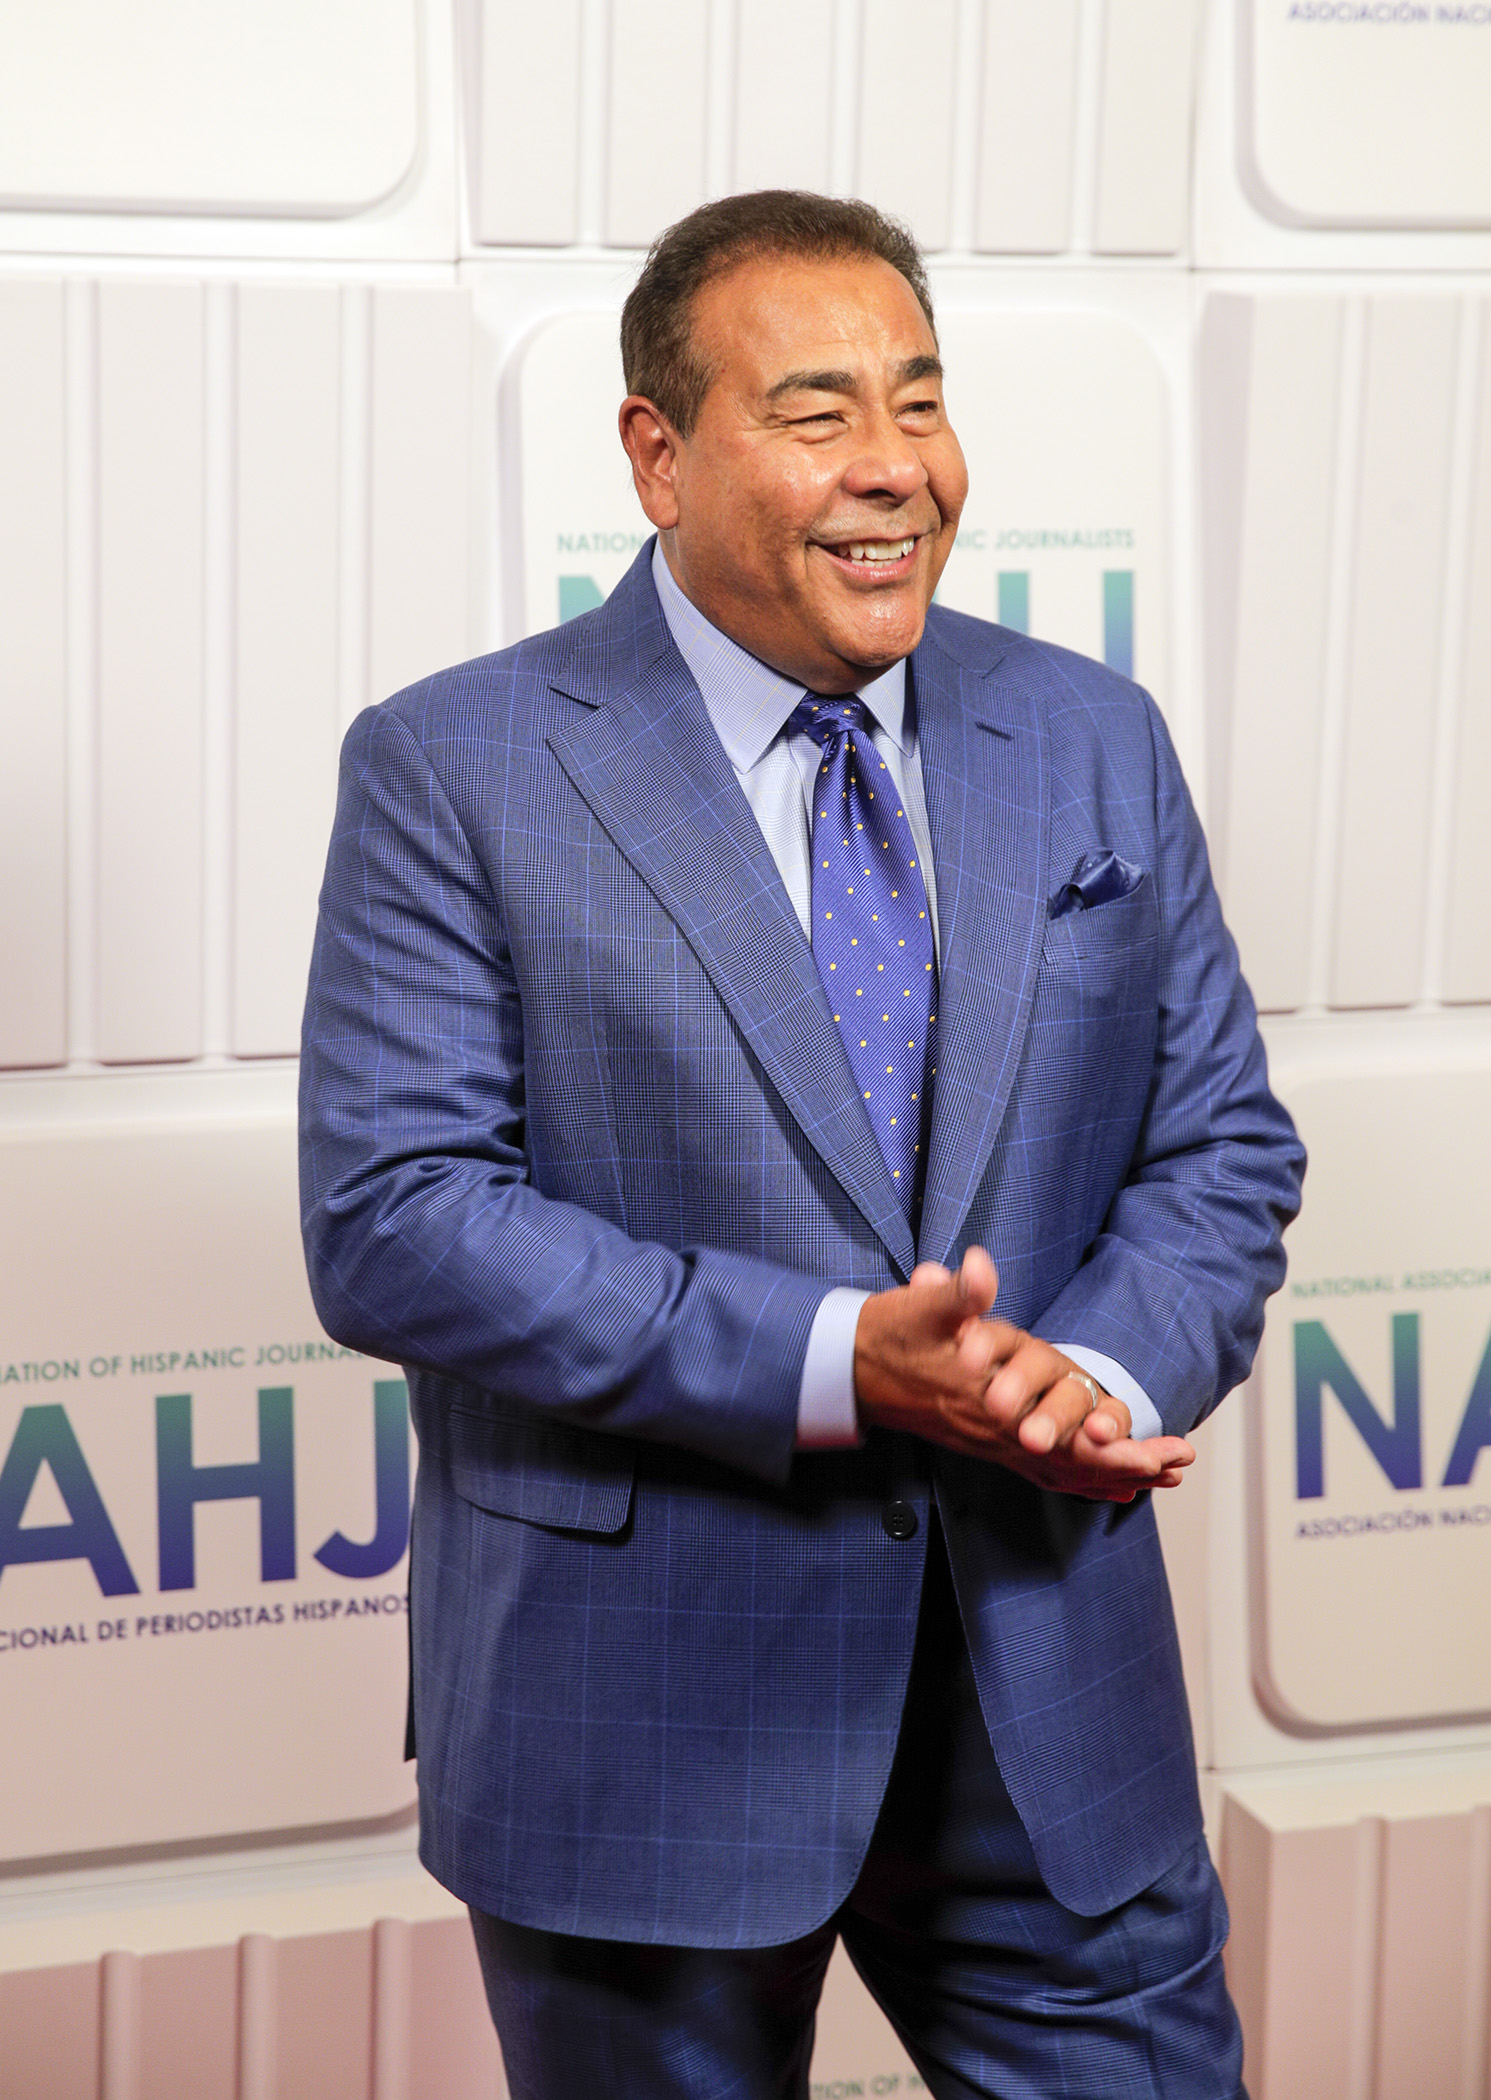 John Quiñones poses for a photo on the National Association of Hispanic Journalists Hall of Fame Gala red carpet in Las Vegas, Nev., on Saturday, August 5, 2022.